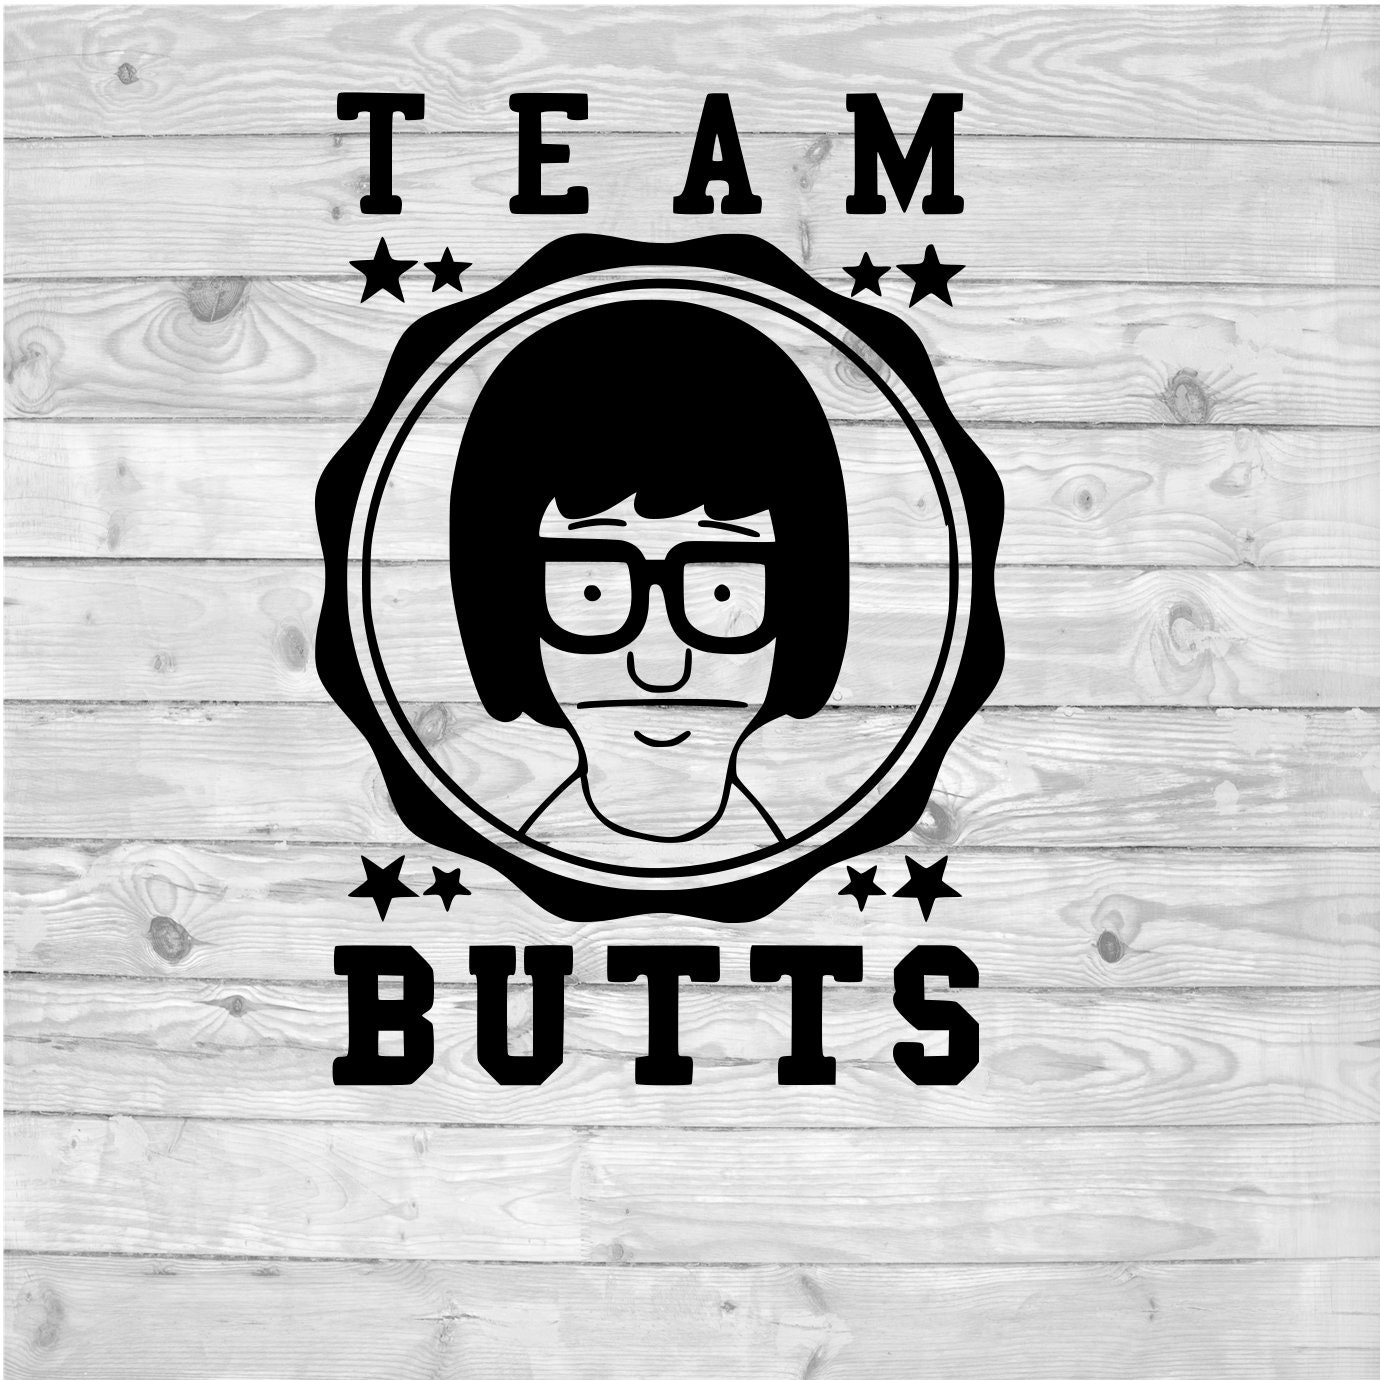 Turn Down For Butt Bobs Burgers EDM Tina Belcher by NickLacke